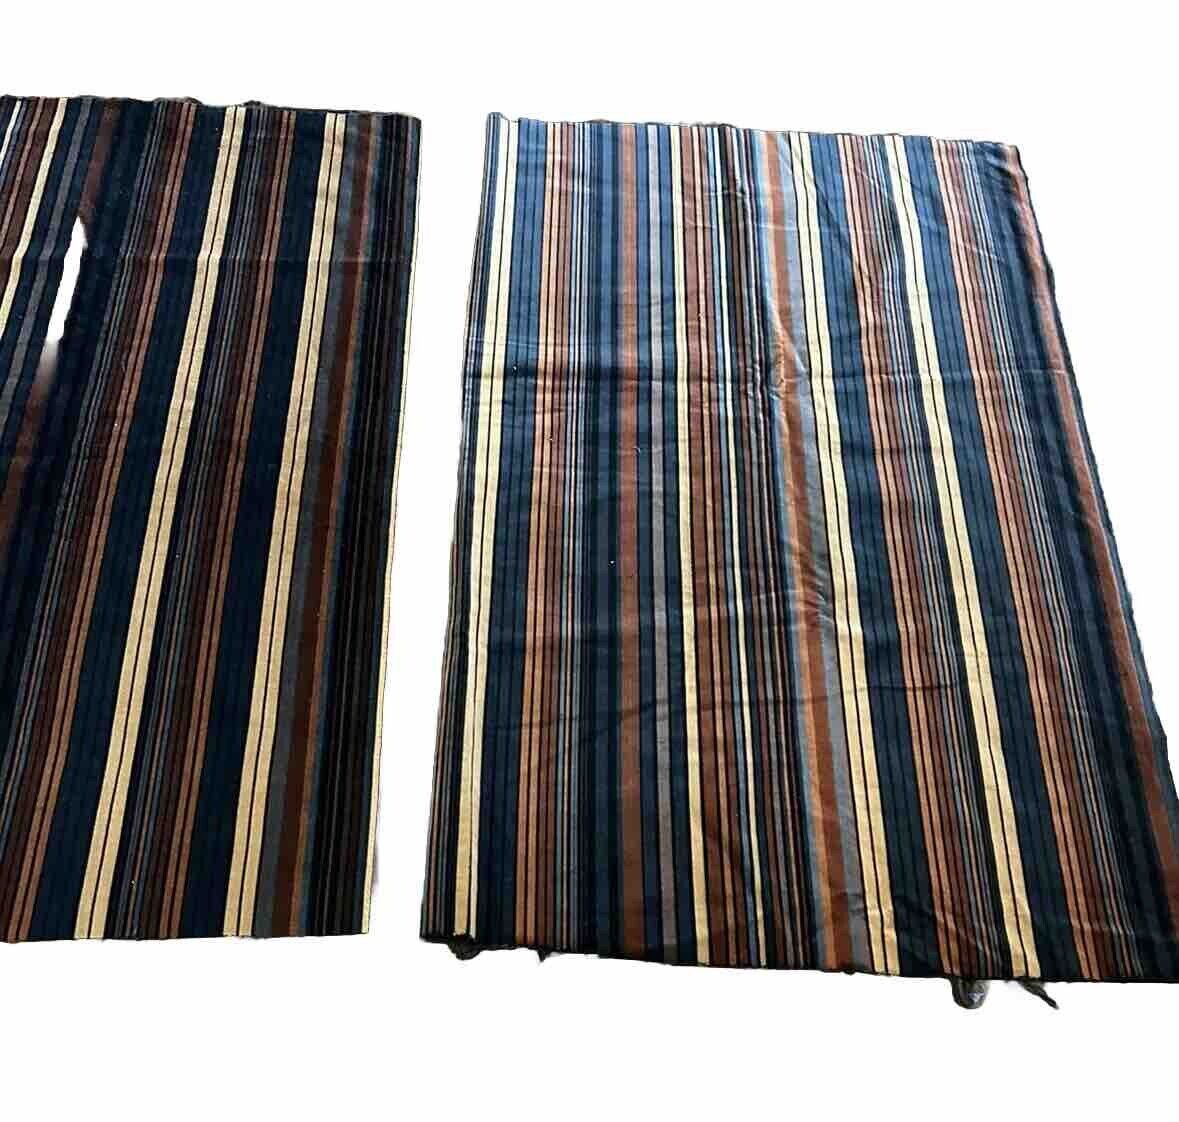 Vintage Striped Velvet Brown Cotton Fabric W44xL32” 2 Pieces Pillow Covers NICE